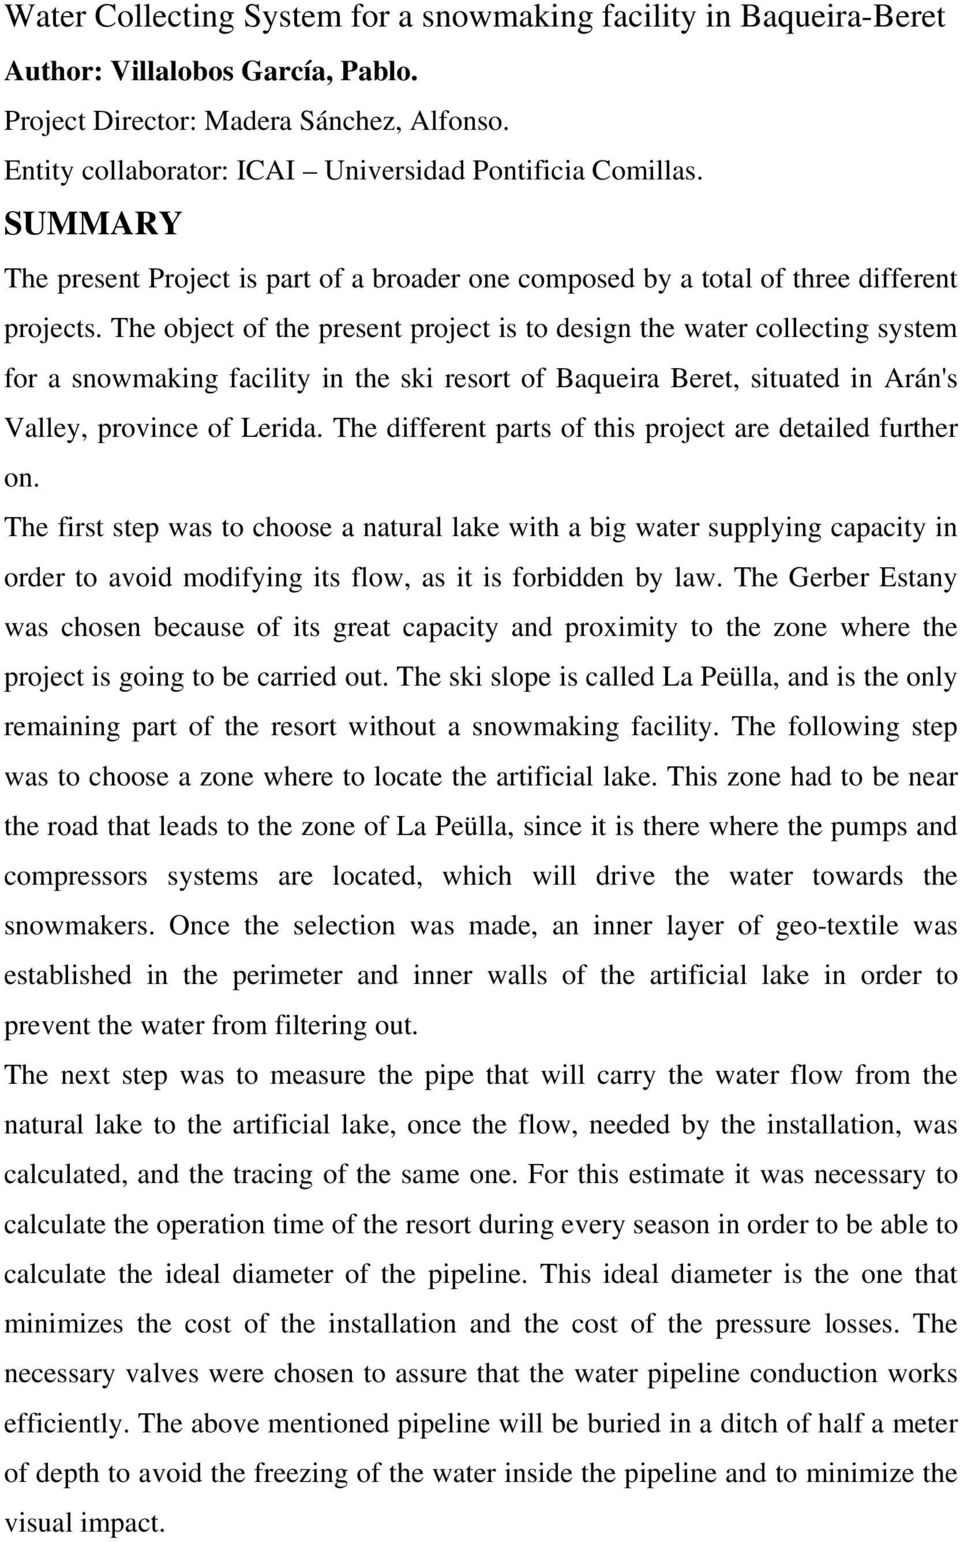 The object of the present project is to design the water collecting system for a snowmaking facility in the ski resort of Baqueira Beret, situated in Arán's Valley, province of Lerida.